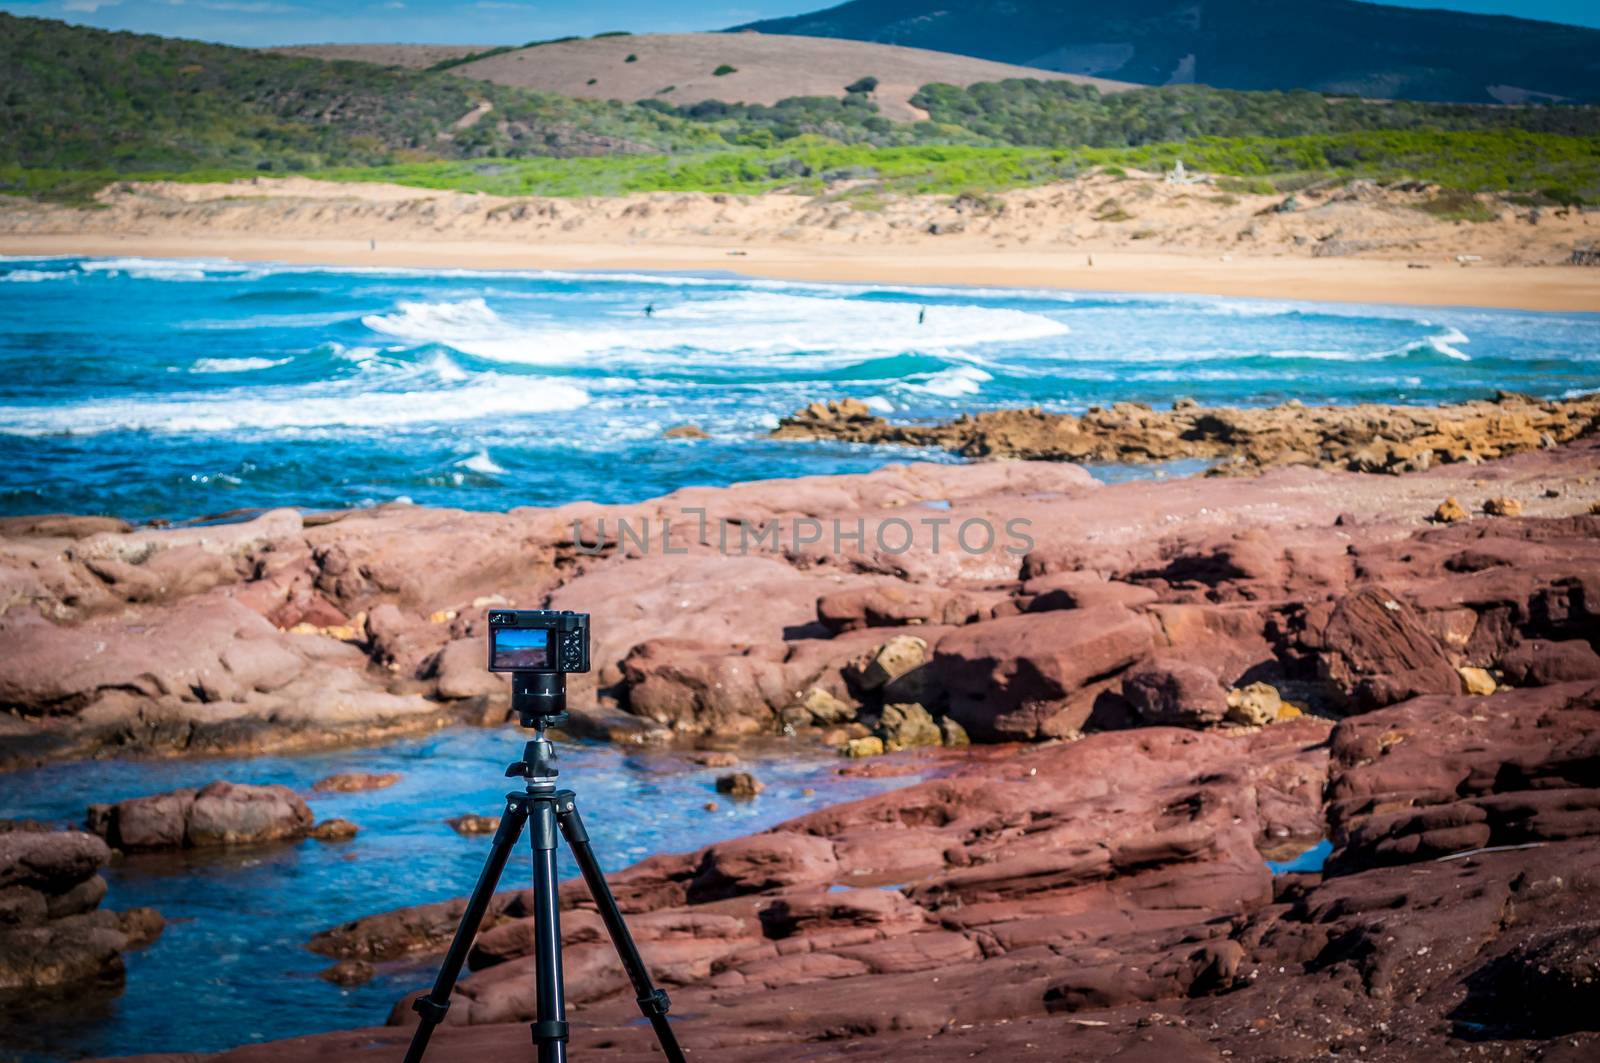 Compact camera on tripod shooting at the coast by replica